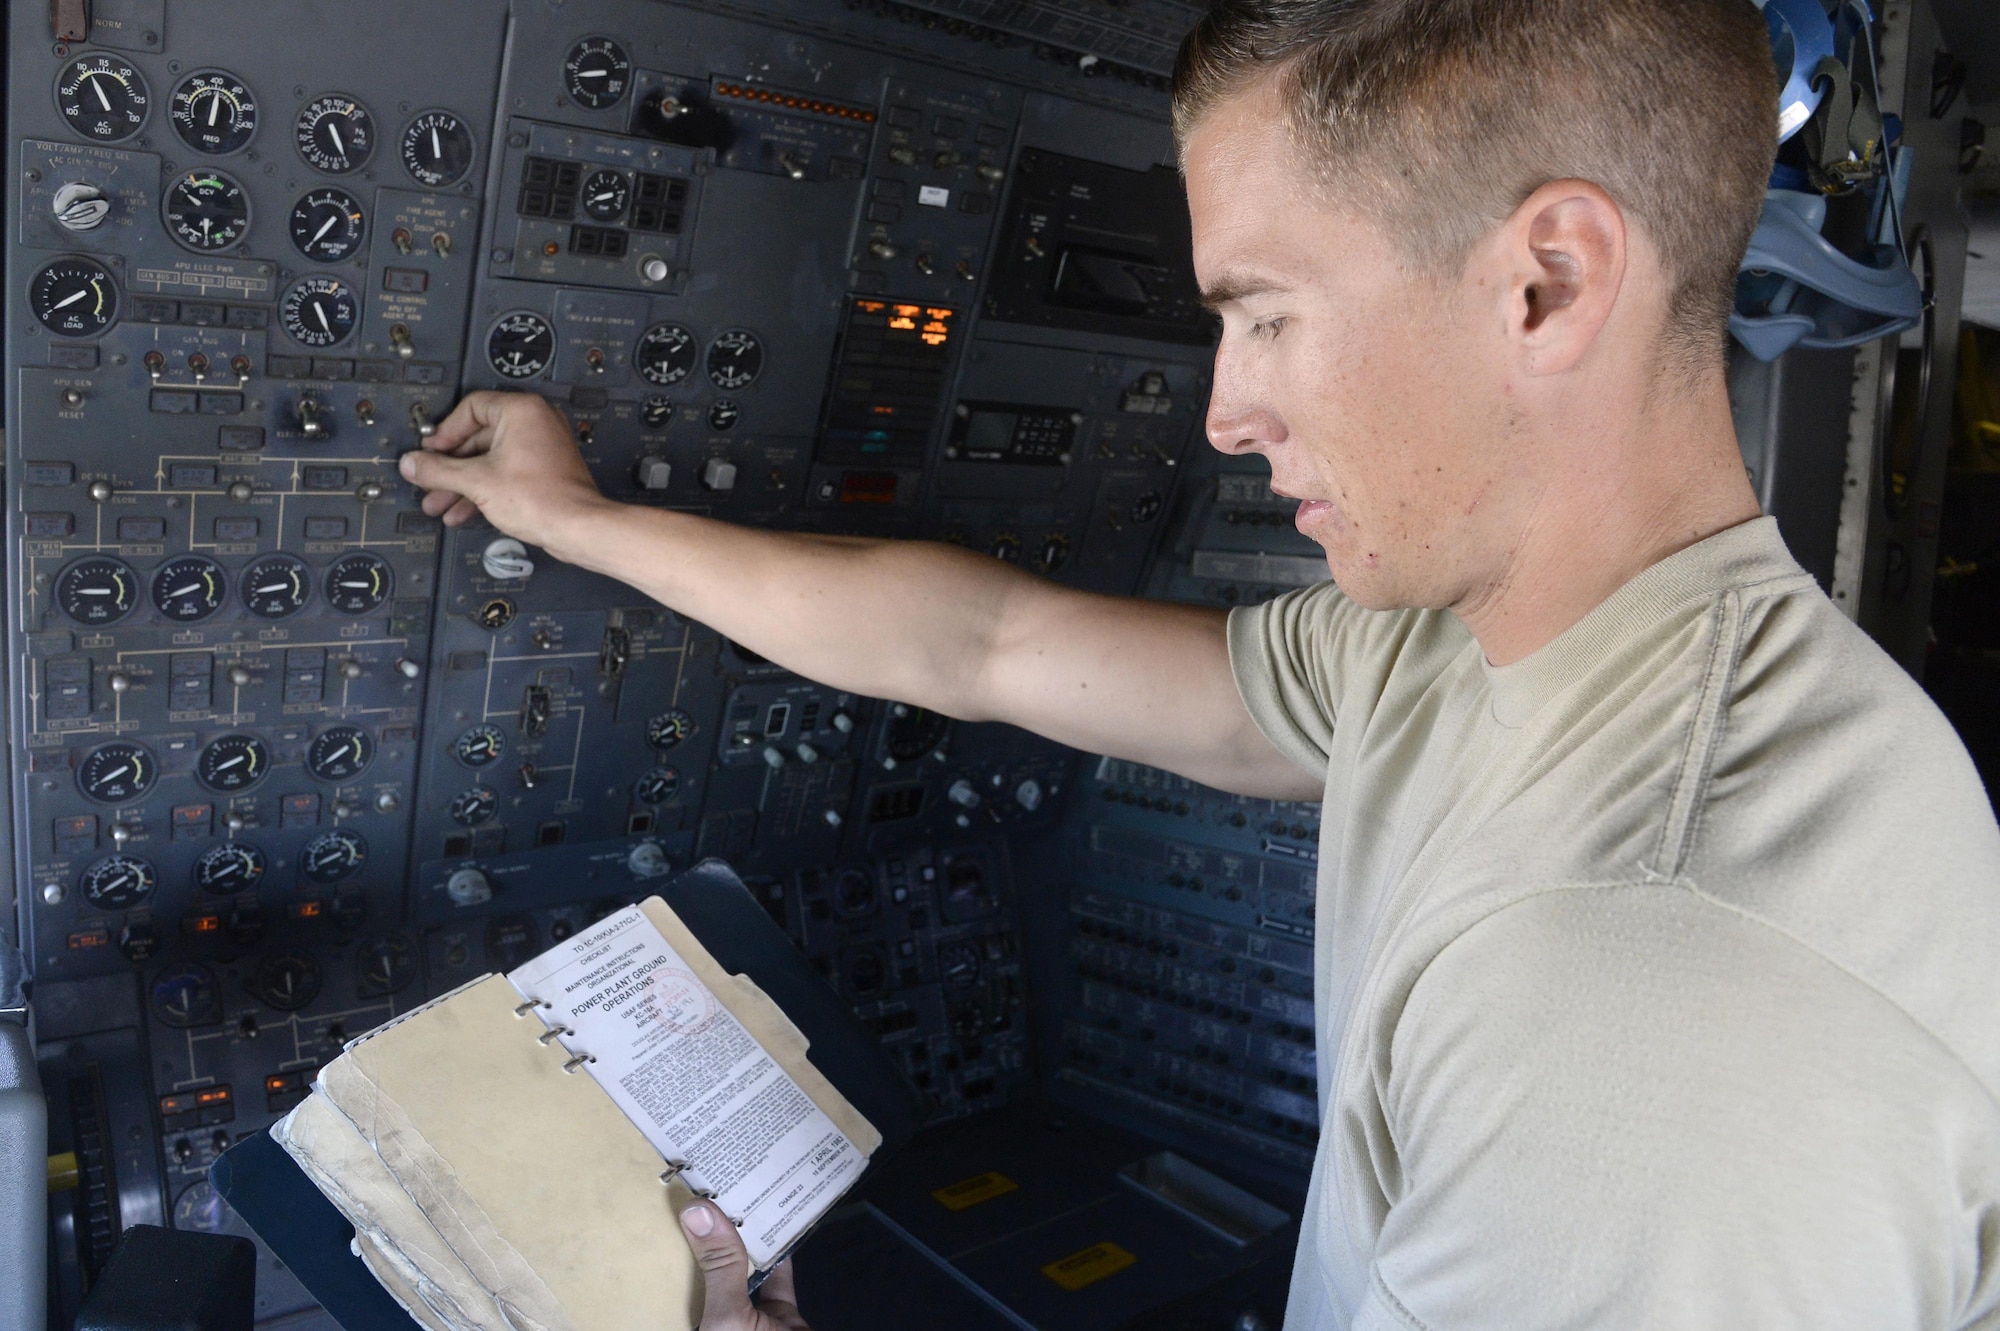 Airman 1st Class Taylor, KC-10 Extender crew chief, reads from his technical order during a preflight inspection aboard a KC-10 Extender at an undisclosed location in Southwest Asia Feb. 2, 2015.  Crew chiefs marshals, look over, inspect, and refuel the aircraft as well as making sure it is ready for another mission. Taylor is currently deployed from Travis Air Force Base, Calif., and is a native of Belleview, S.D. (U.S. Air Force photo/Tech. Sgt. Marie Brown)